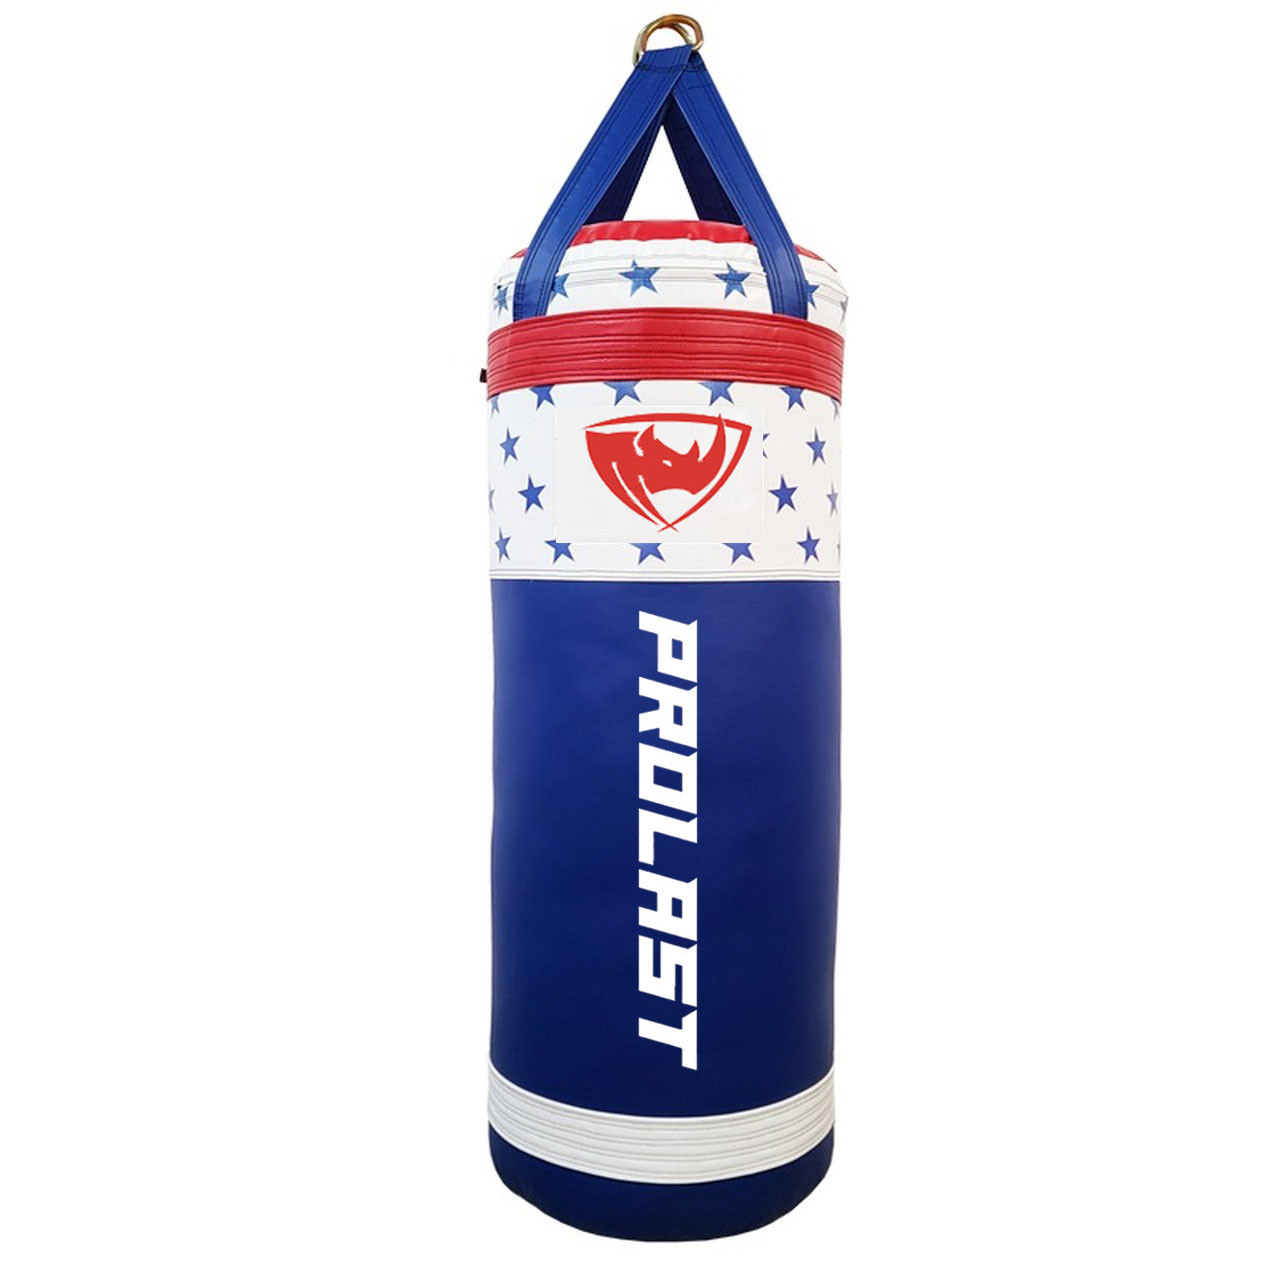 Prolast Heavy Punching Bag 4 ft Not Filled for and Kicking, Boxing, MMA, Muay Thai and Kickboxing for The Best Fitness Workouts for Adults and Kids